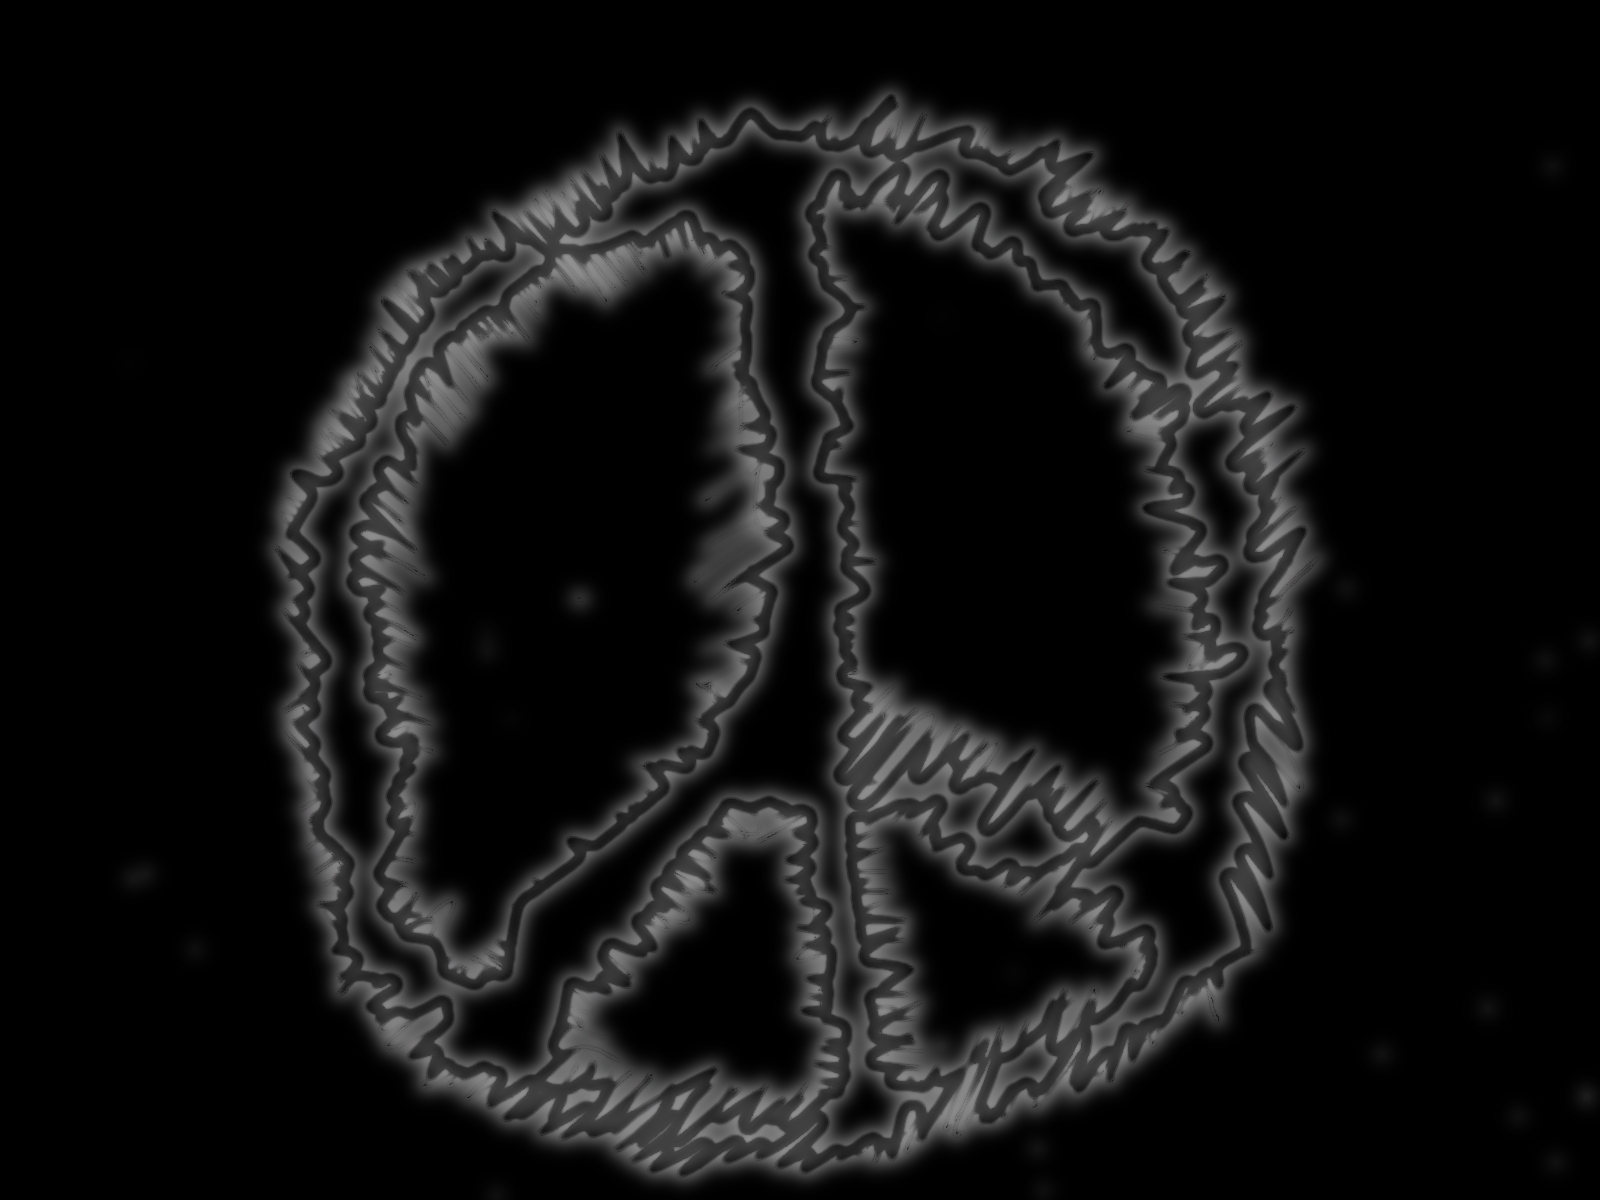 Peace sign BLACK and WHITE by reinismix0lost on DeviantArt